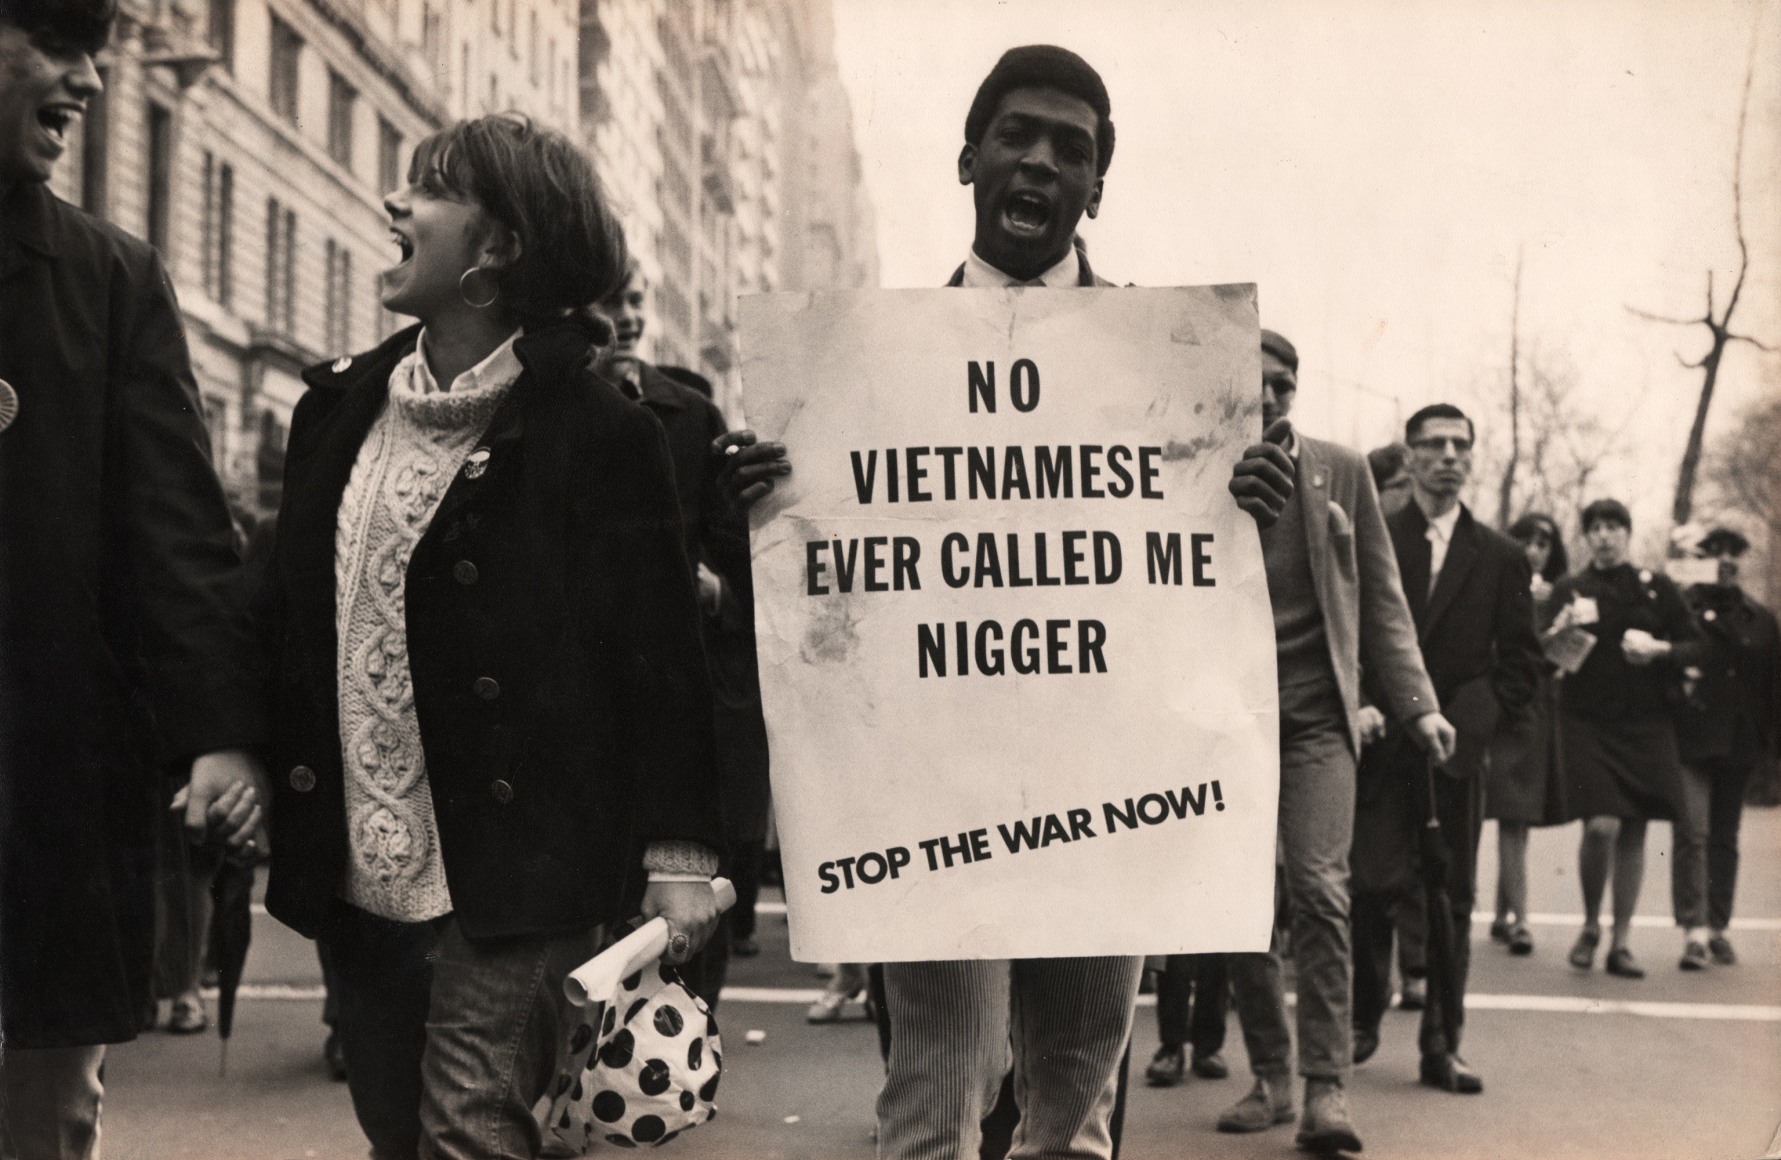 34. LeRoy Henderson, 1st Anti-Vietnam War Rally, Marchers on Madison Avenue, April 15, 1967. A young man marches in the street holding a sign that reads &quot;No Vietnamese ever called me nigger - stop the war now!&quot;